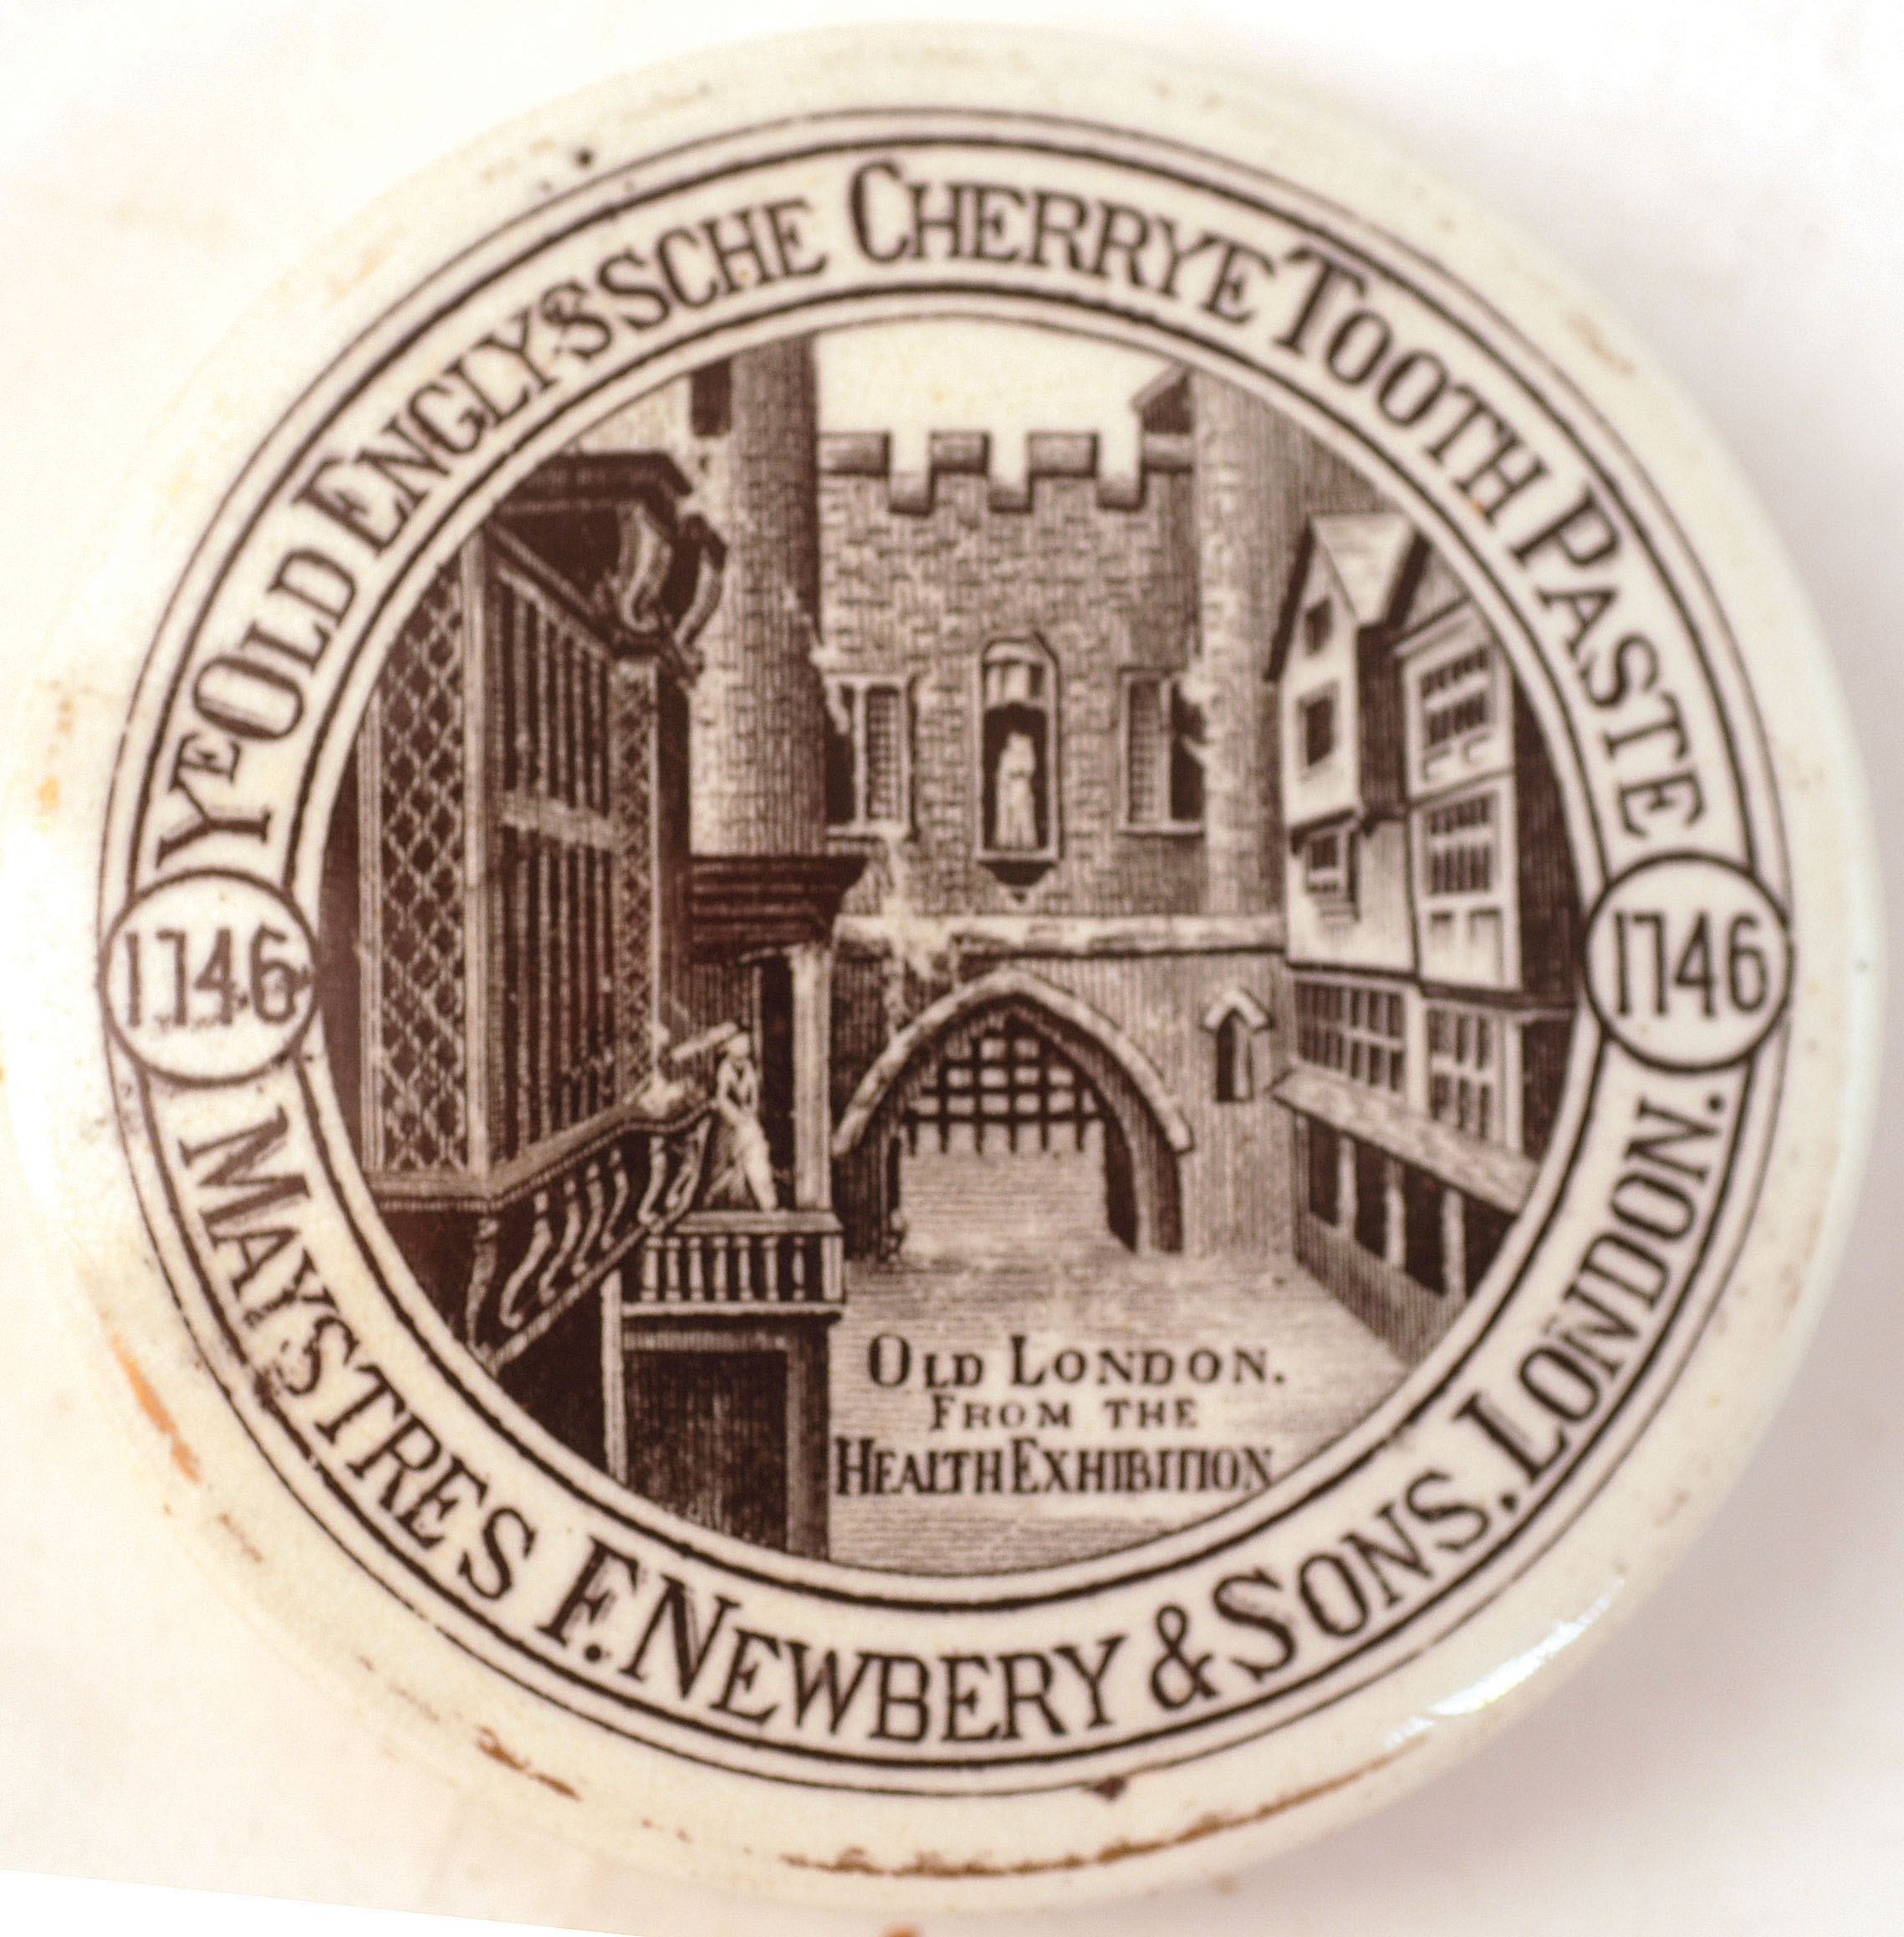 F. NEWBERY & SONS TOOTHPASTE POT LID. 3.5ins diam, black transfer ‘YE OLD ENGLY-SSCHE CHERRYE